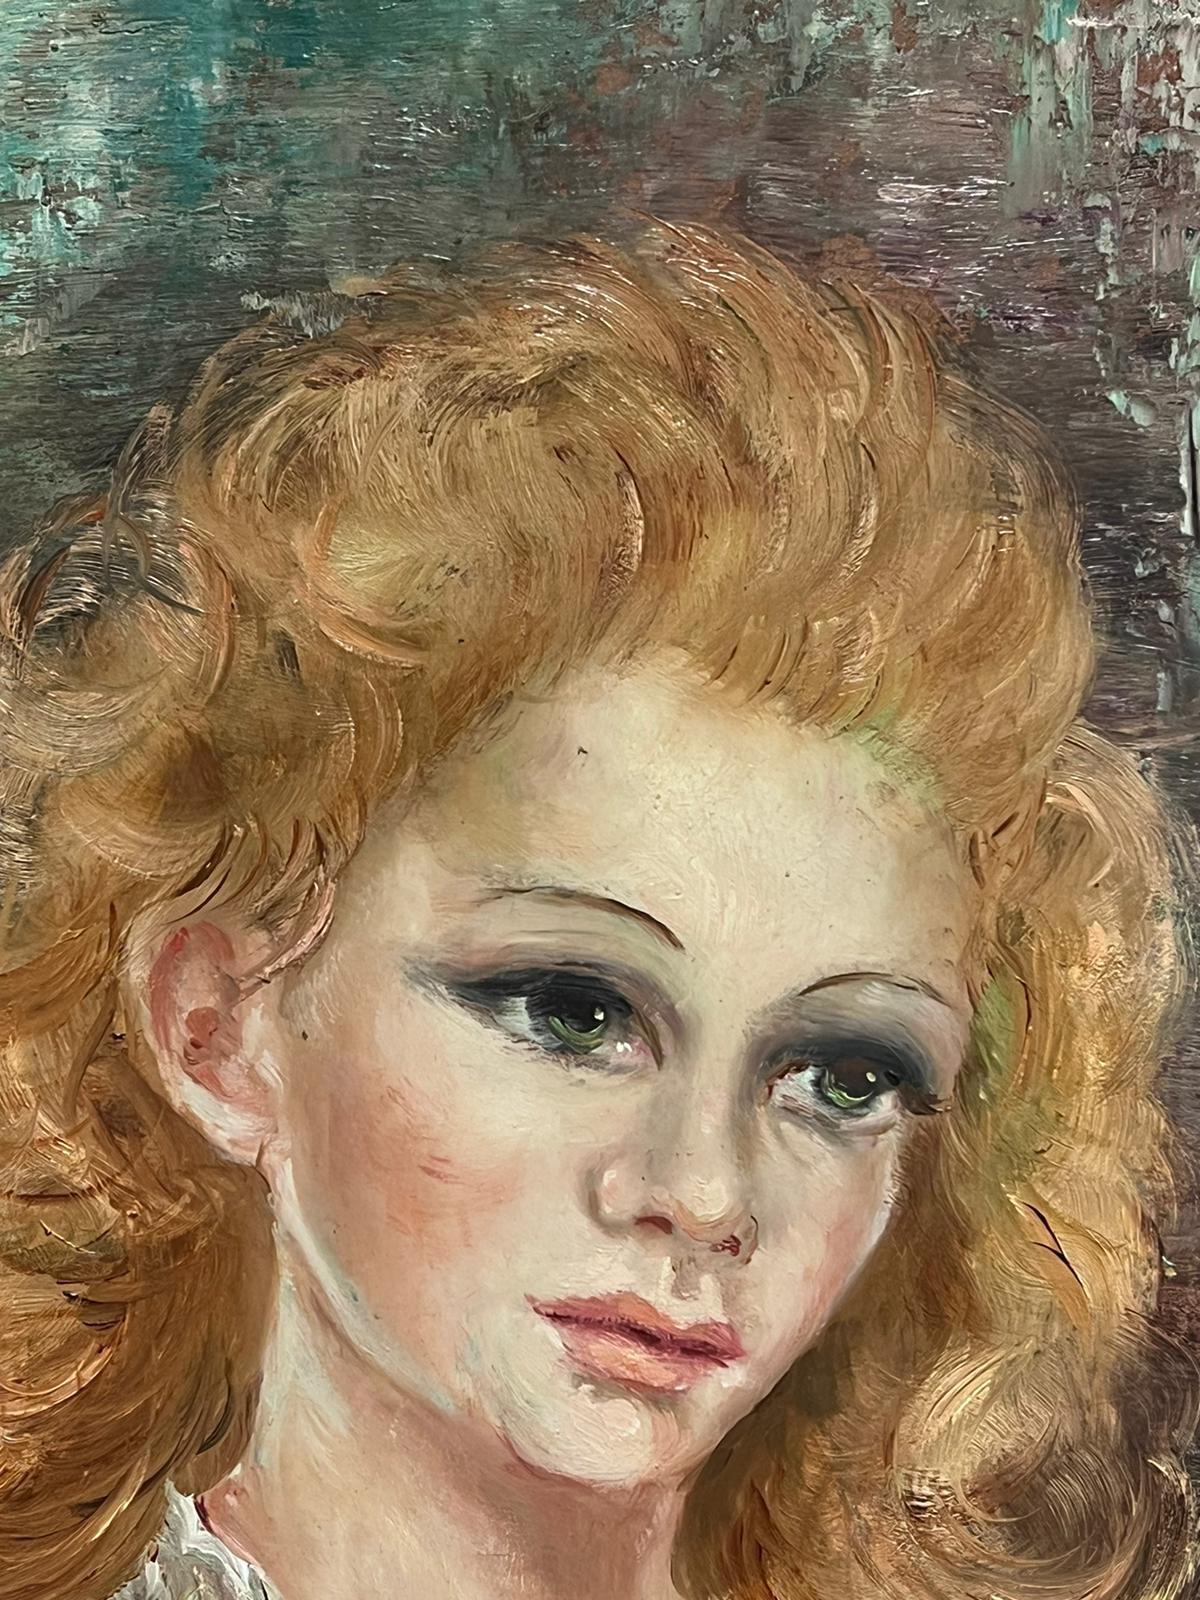 Portrait of a Young Lady
by Anna de Banguy (French mid 20th century)
signed oil on board, framed
framed: 29 x 23 inches
painting: 23 x 17 inches
provenance: private collection, France
condition: very good and sound condition 